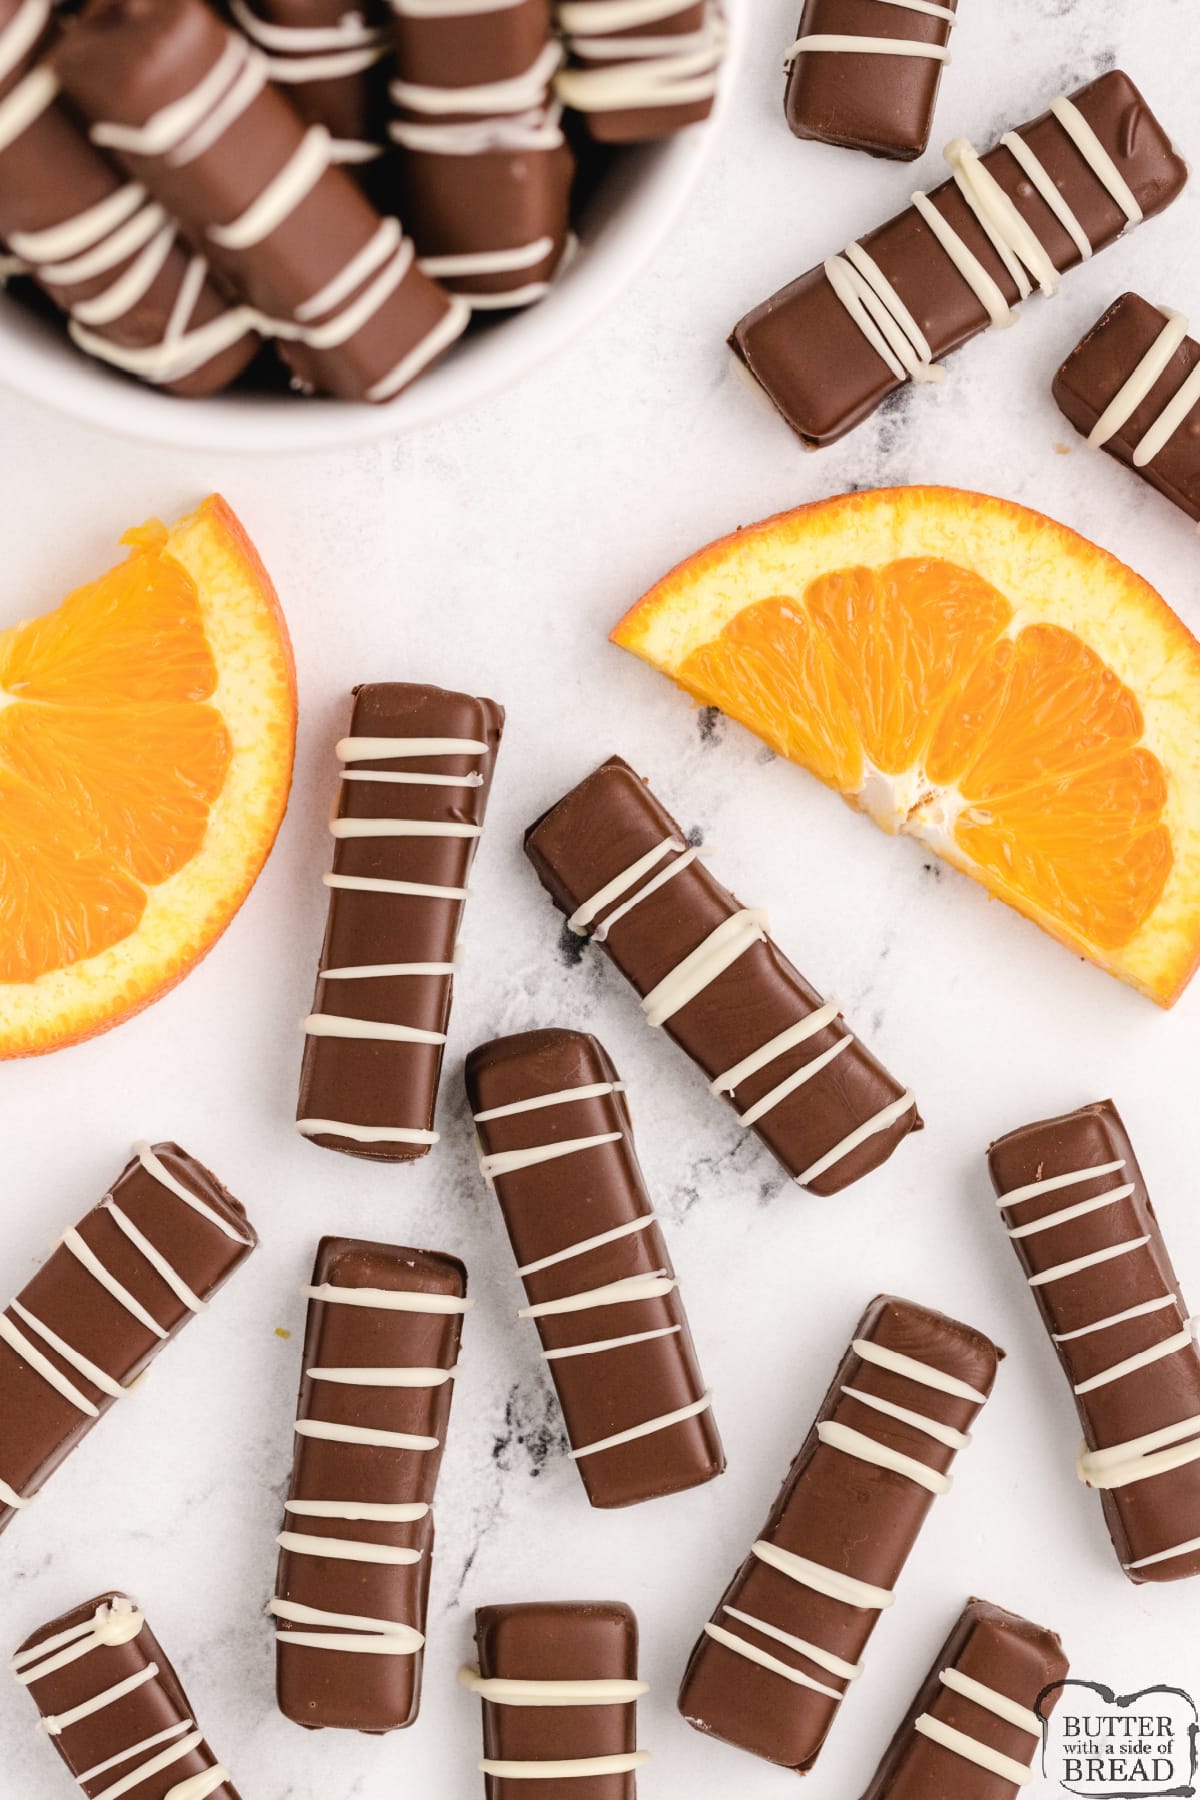 Jellied orange candy dipped in chocolate